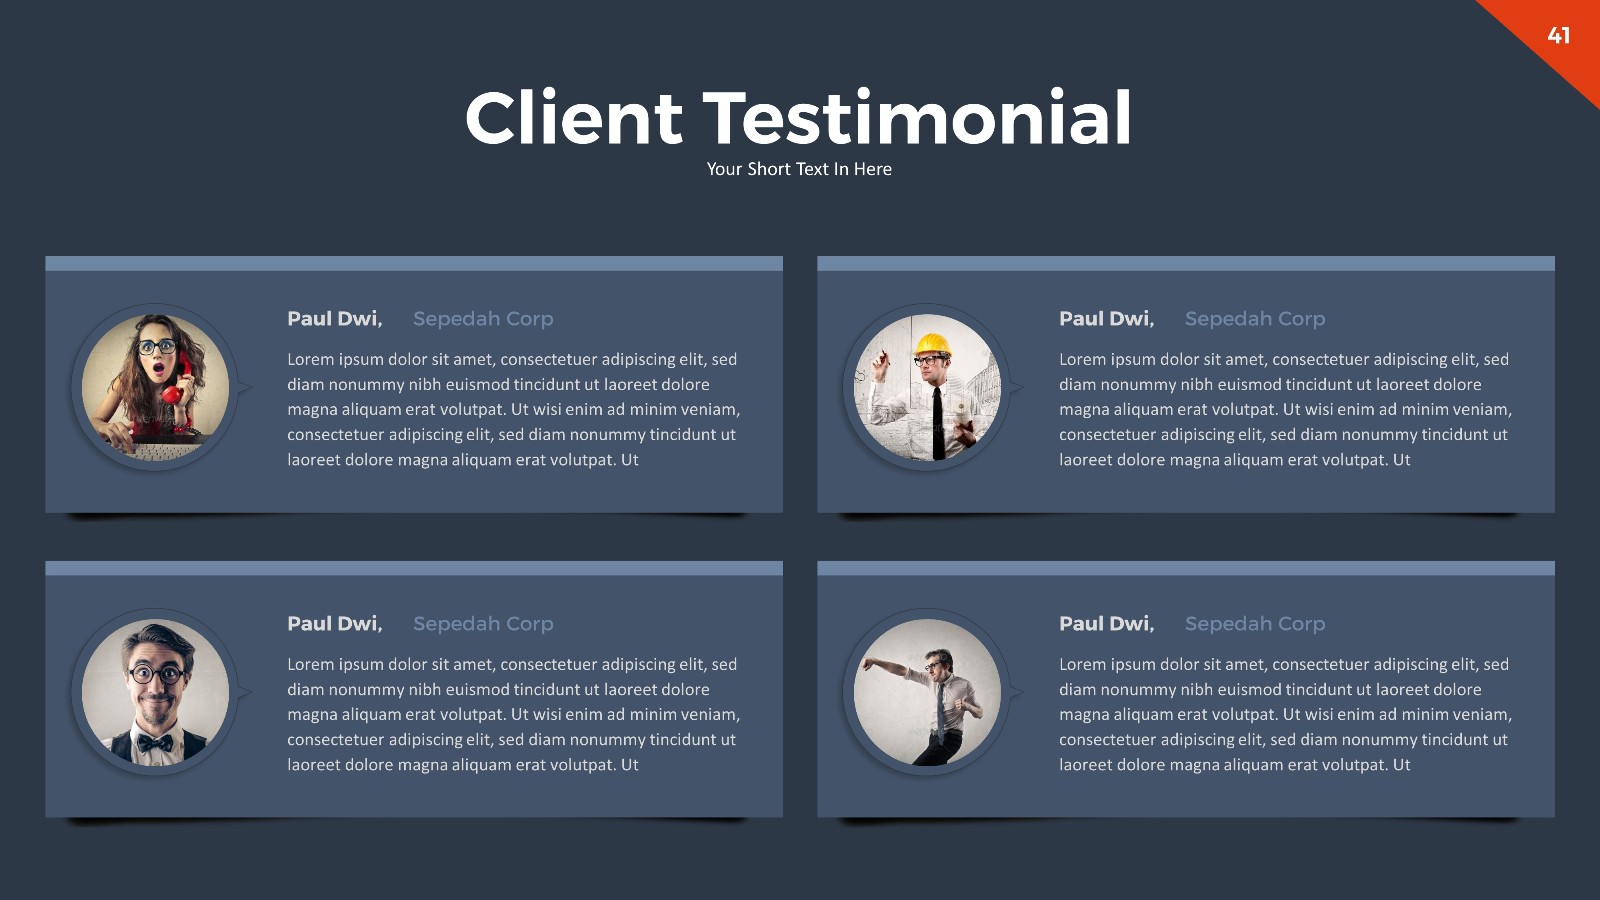 Testimony PowerPoint Template by RRgraph | GraphicRiver